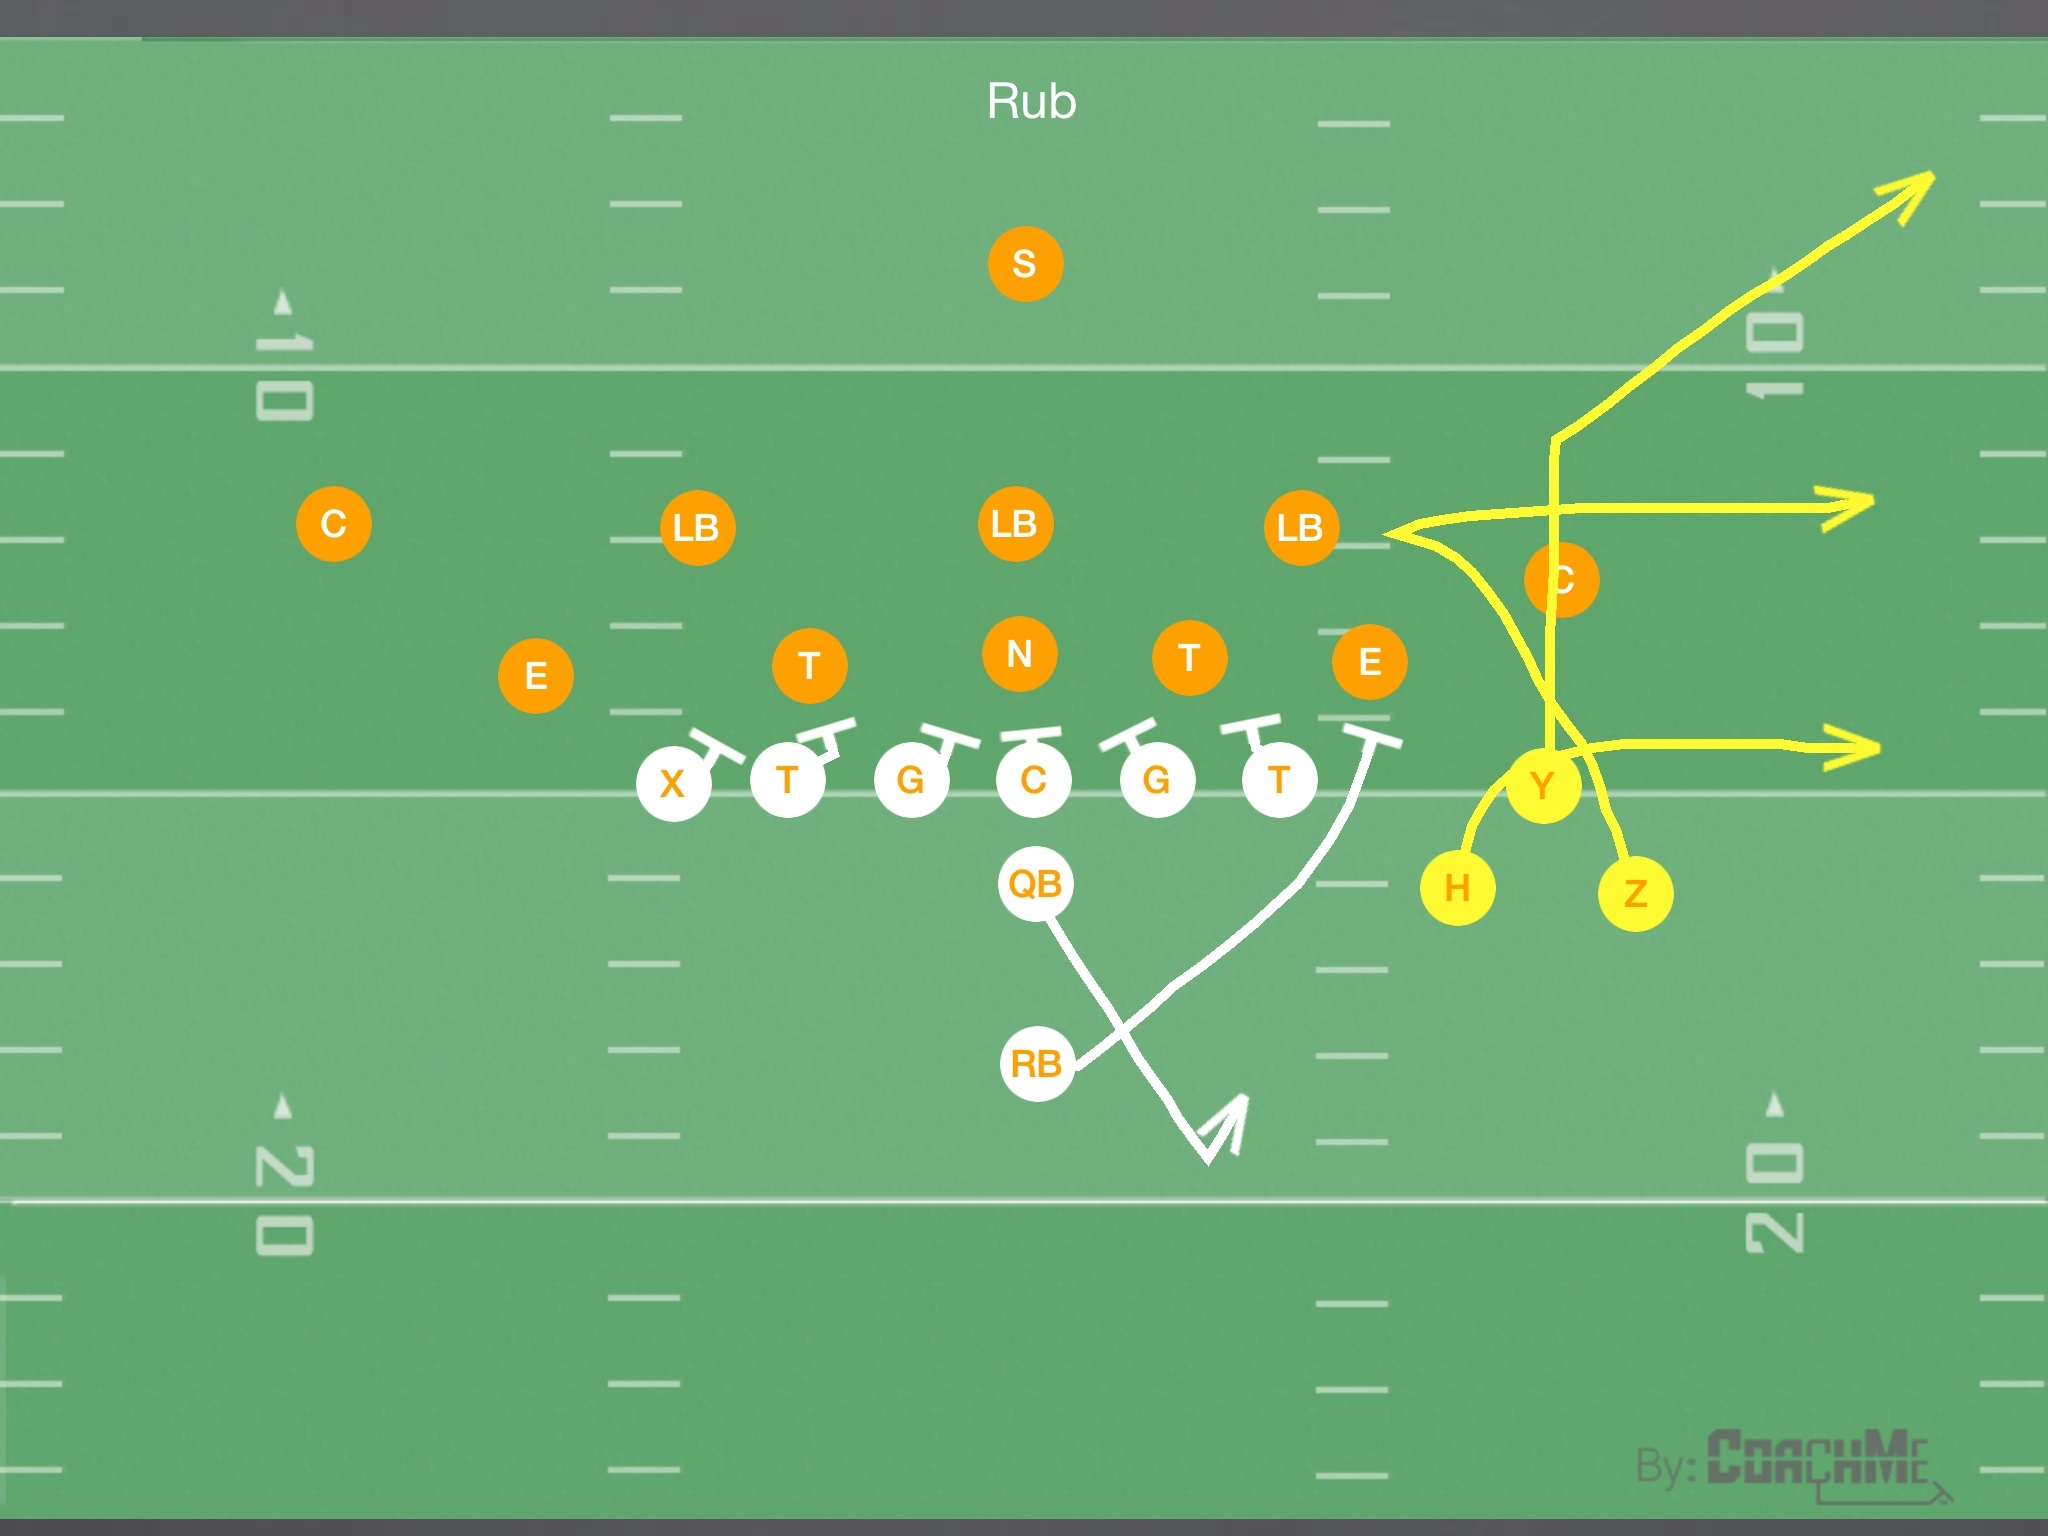 Bunch formation passing plays